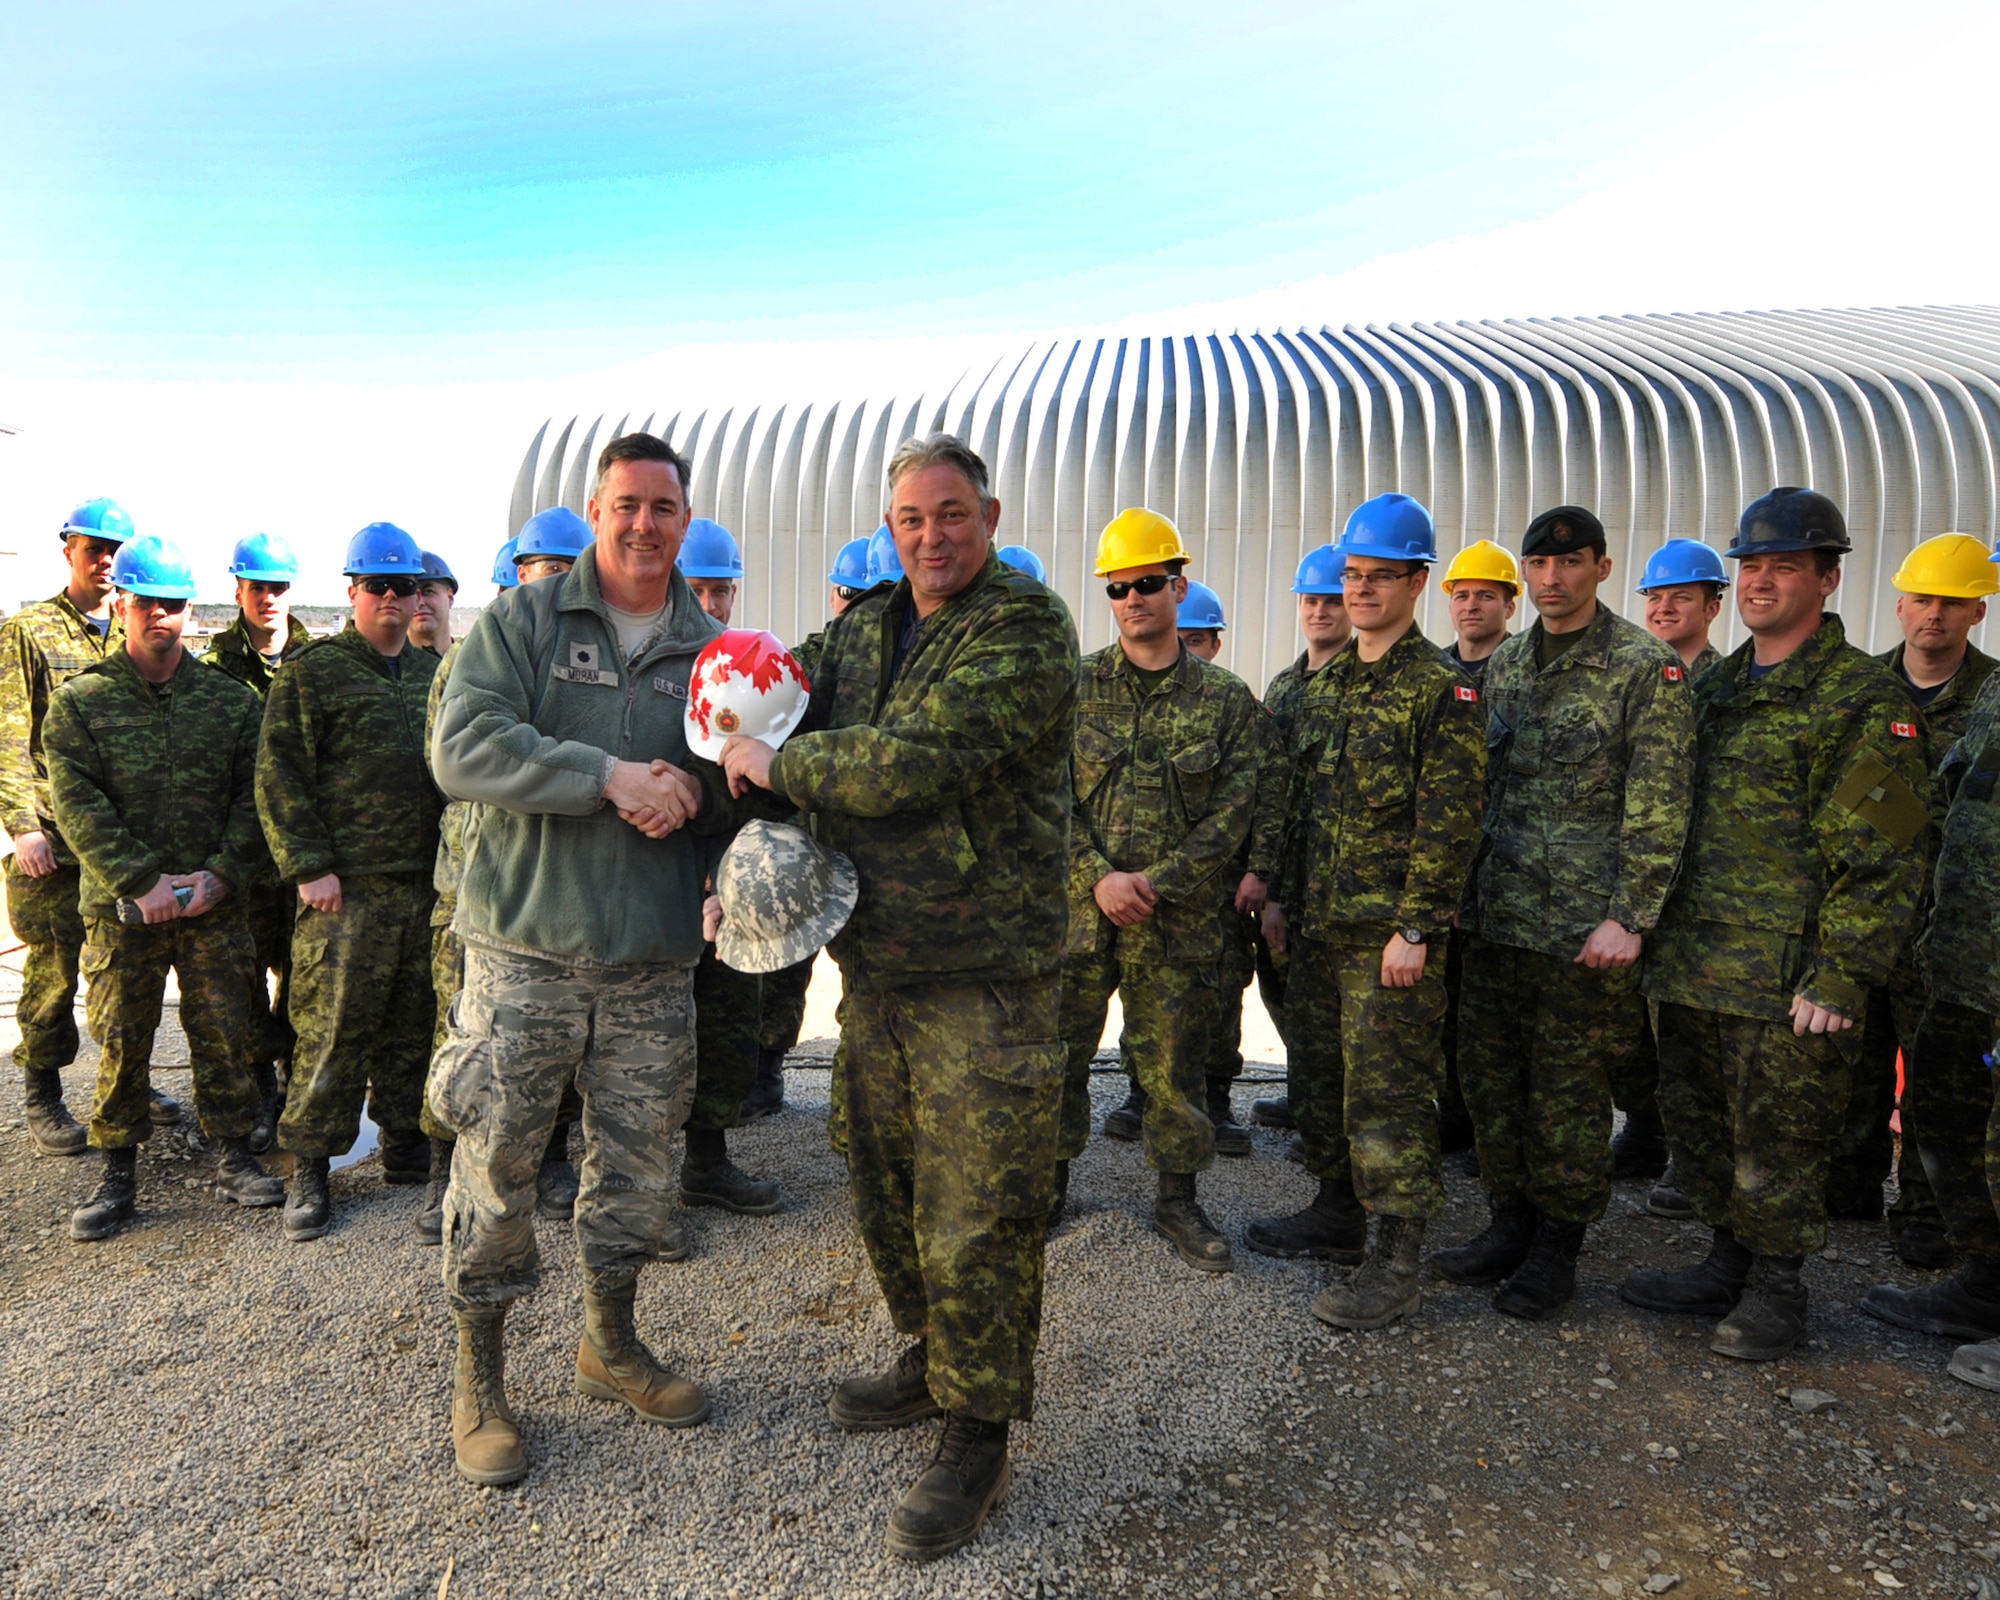 NEW LONDON, N.C.  – Lt. Col. Timothy Moran, Deputy Commander, 145th Engineer Squadron swaps construction helmets with Master Warrant Officer Martin Cloutier, Royal Air Force 3 Wing Construction Engineers Canadian Forces from Bagotville, Quebec. Cloutier is one of 26 engineers participating in a two week Deployment for Training Program, an exchange agreement between the Royal Canadian Air Force and the United States Air National Guard hosted by 145th Civil Engineering Squadron at the North Carolina Air National Guard Regional Training Site in New London, N.C.  (National Guard Photo by Tech. Sgt. Patricia Findley, 145th Public Affairs) 

